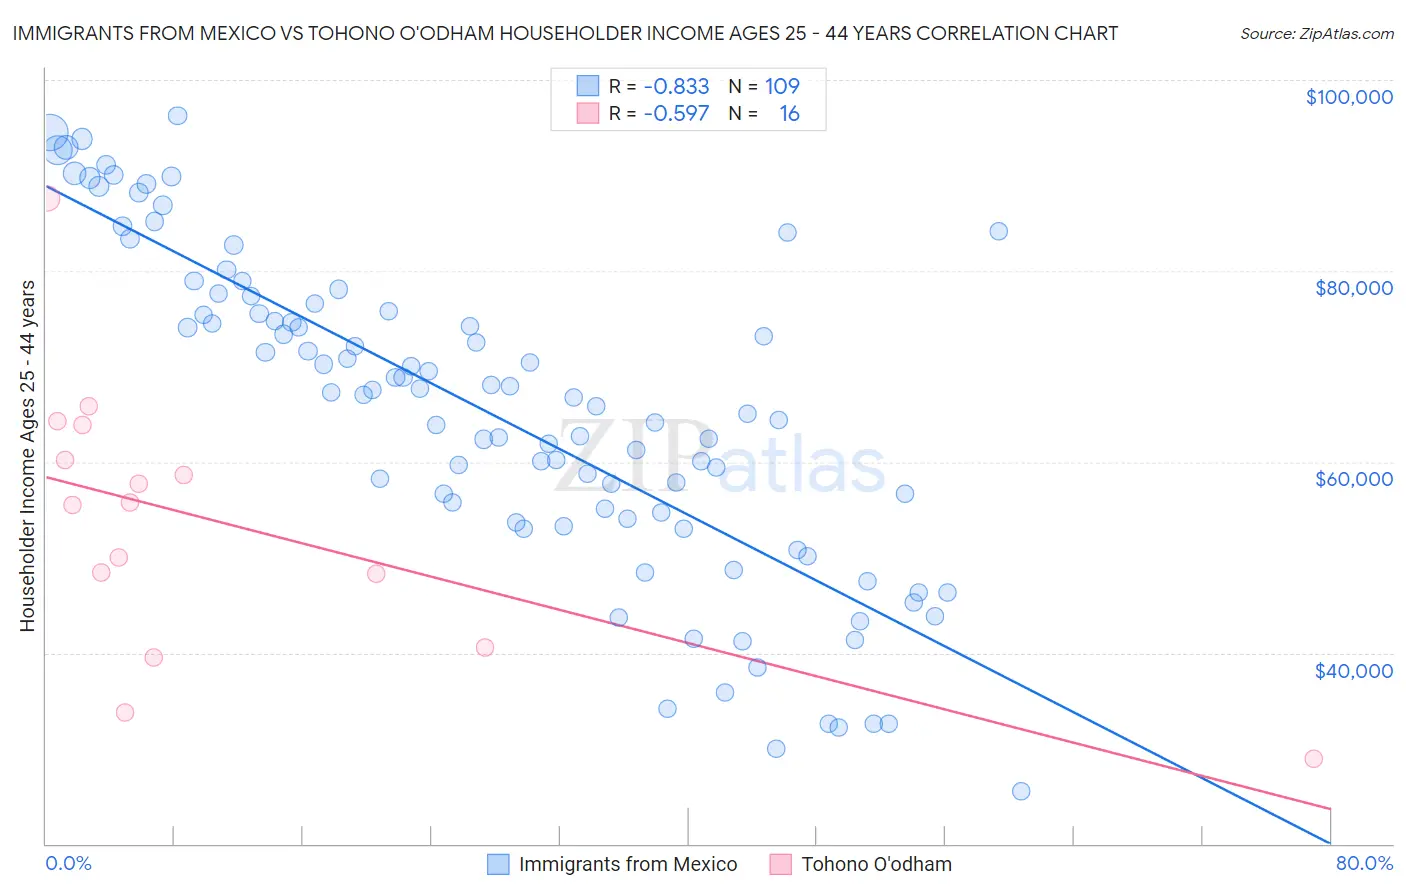 Immigrants from Mexico vs Tohono O'odham Householder Income Ages 25 - 44 years